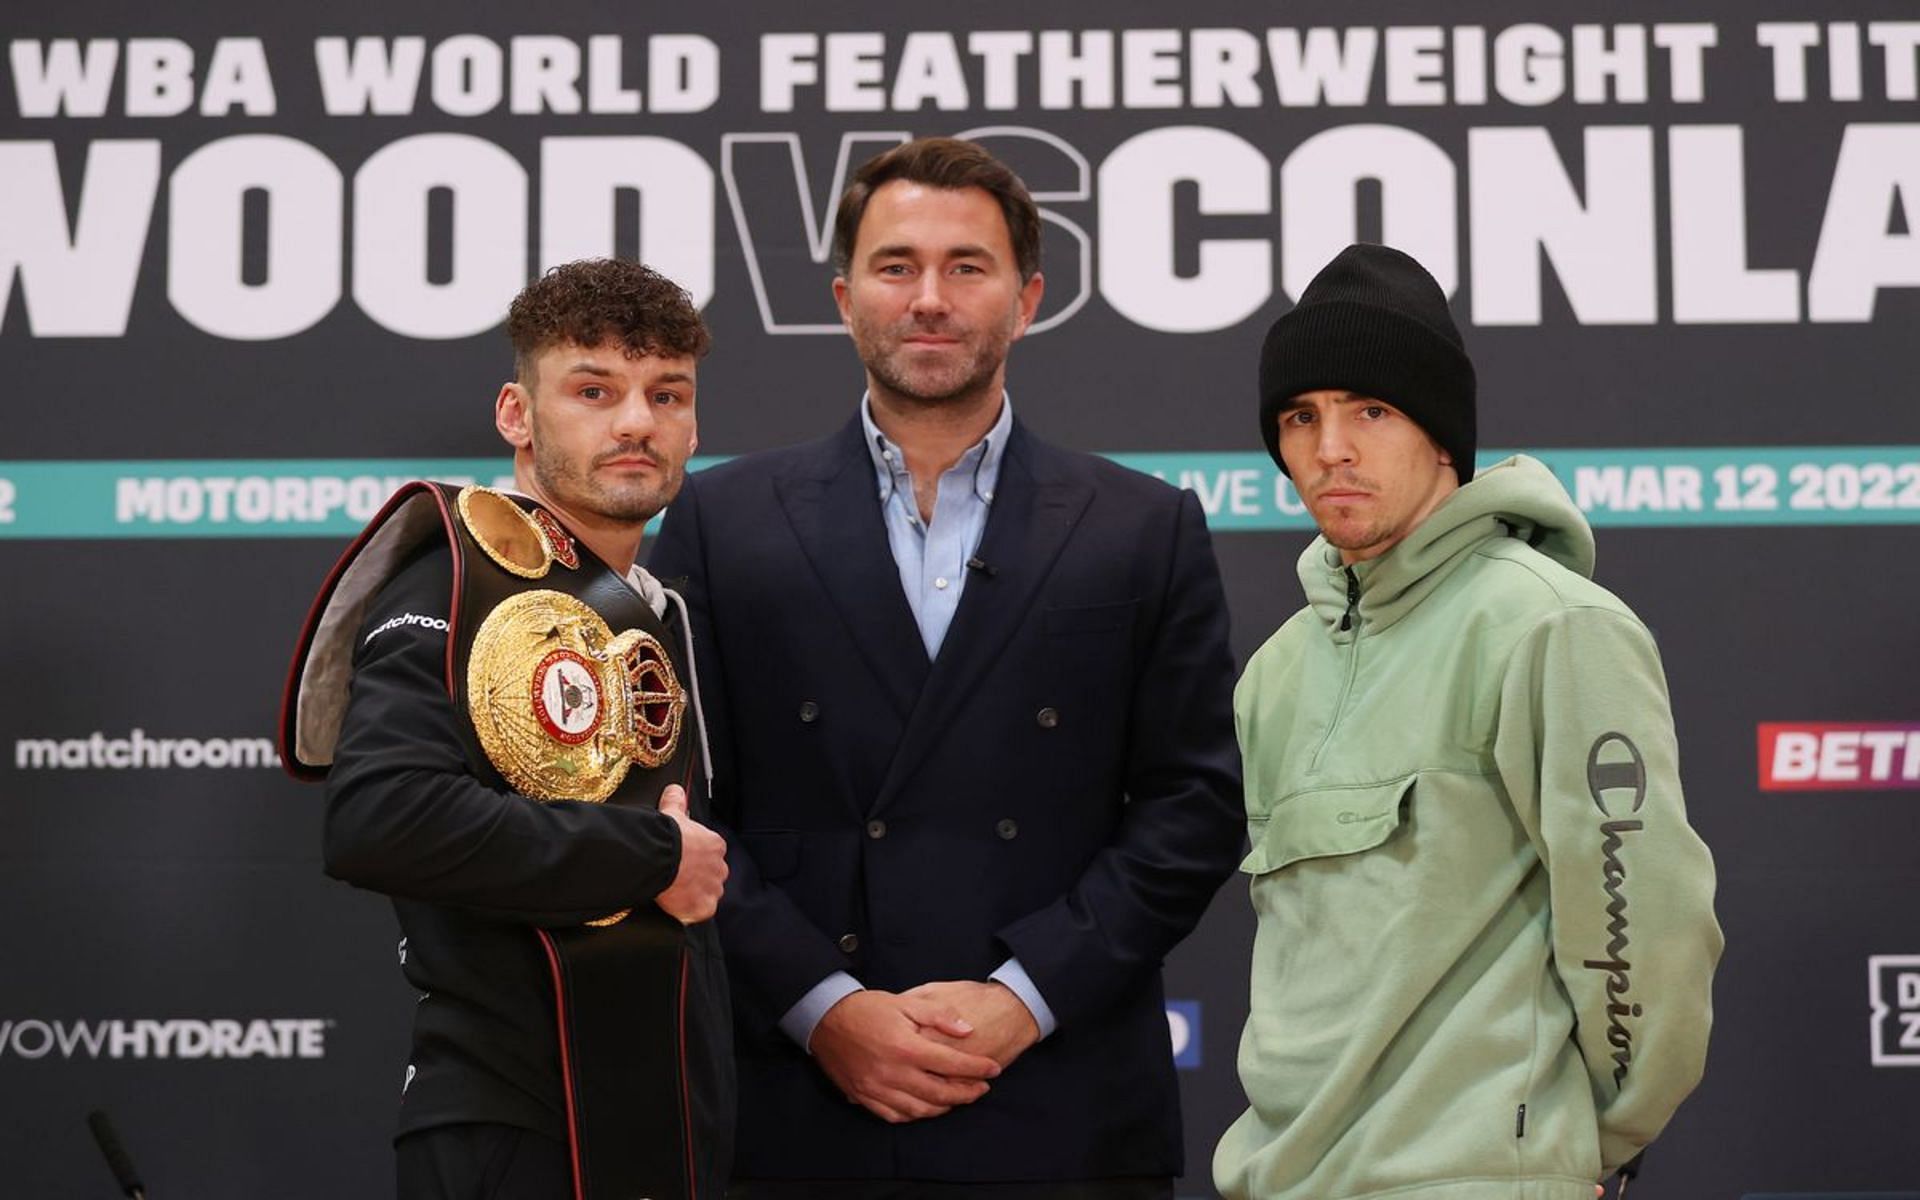 Leigh Wood (L) and Michael Conlan (R) squared off Saturday night in England.